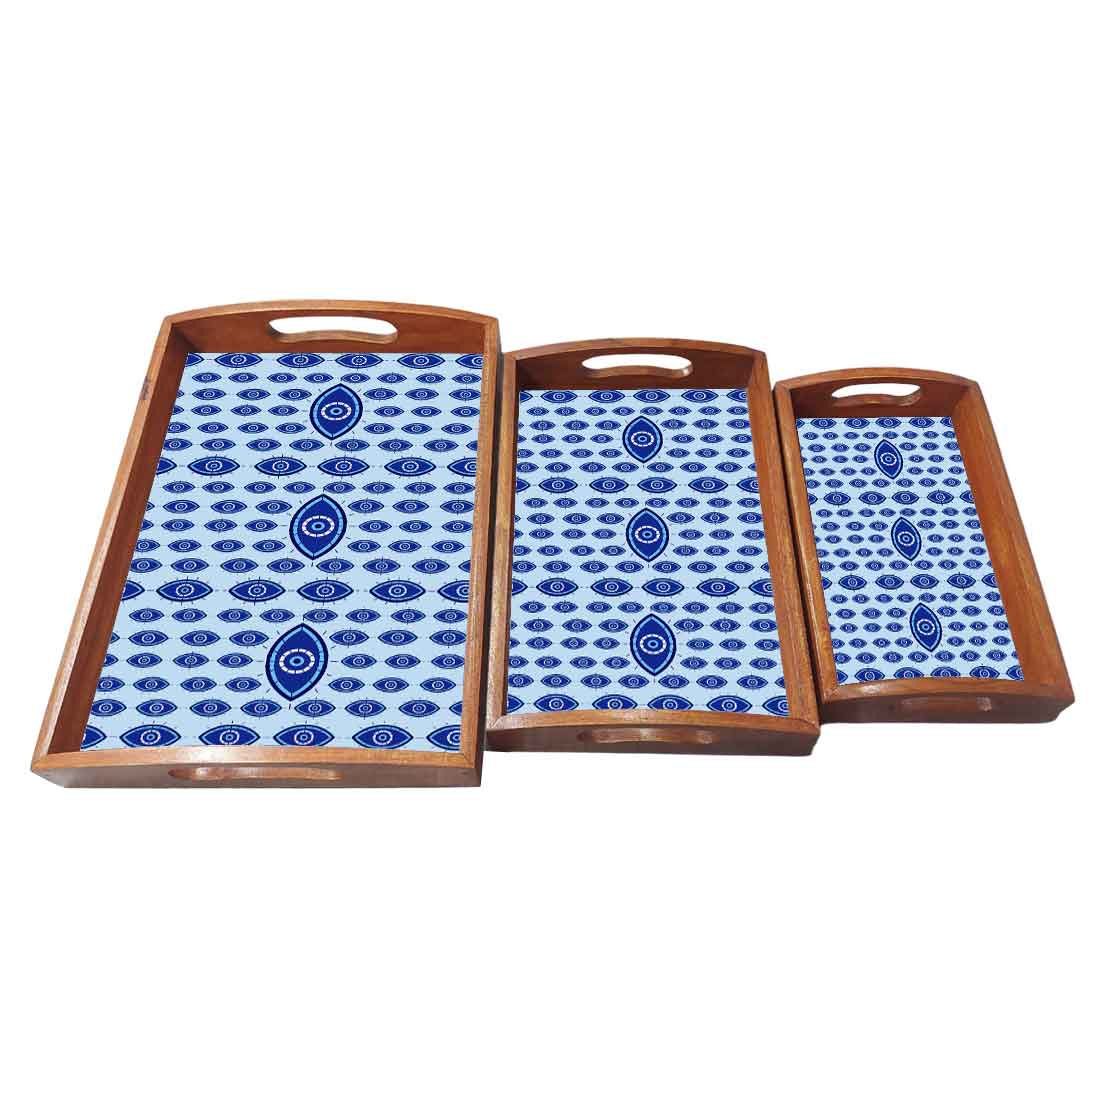 Designer Wooden Food Serving Plate Tray with Handle Set of 3